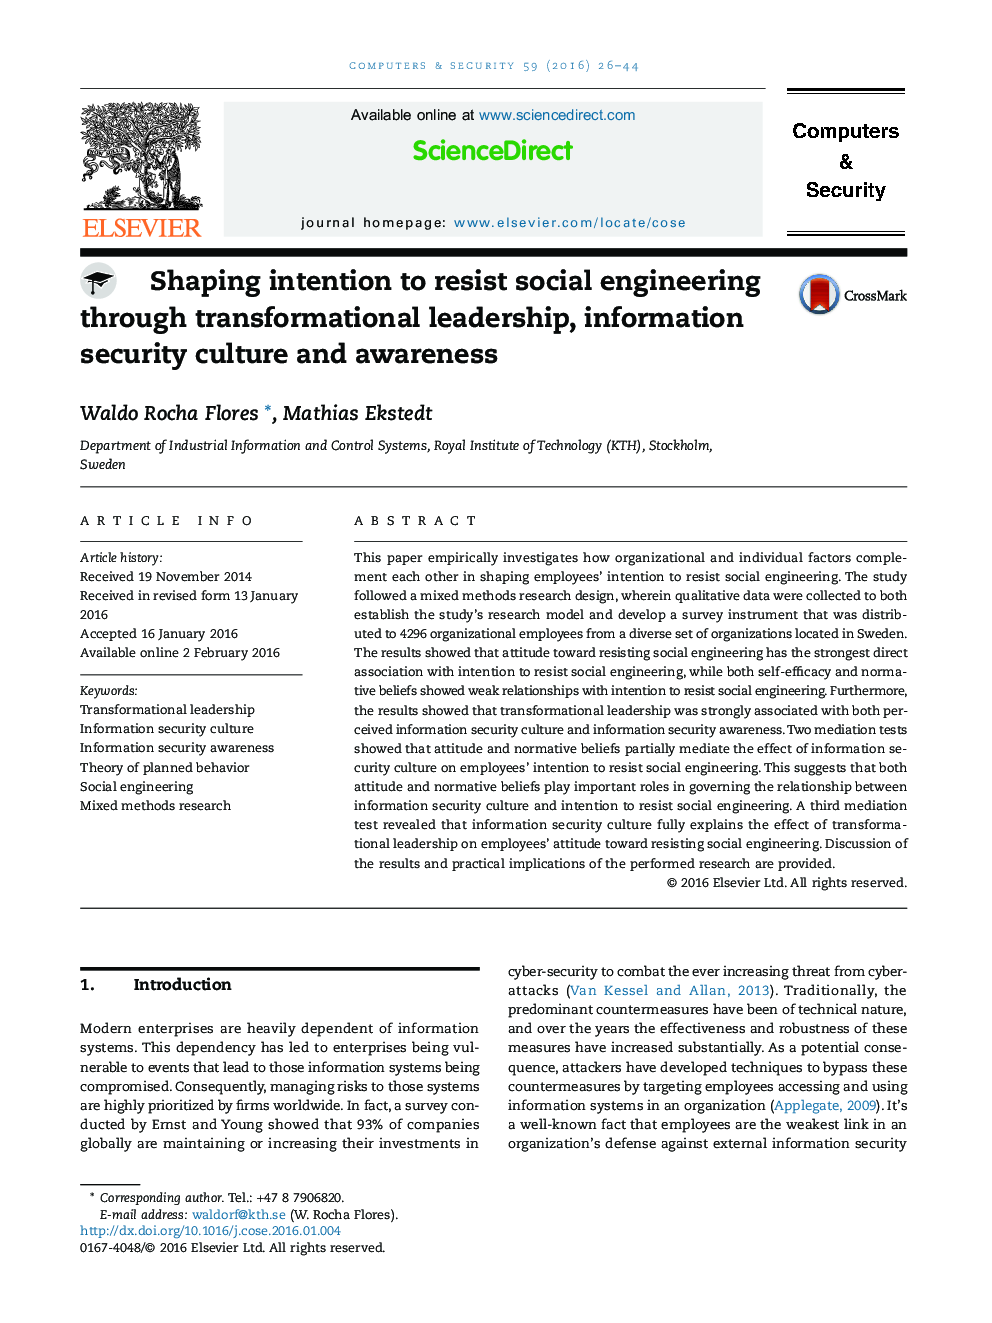 Shaping intention to resist social engineering through transformational leadership, information security culture and awareness